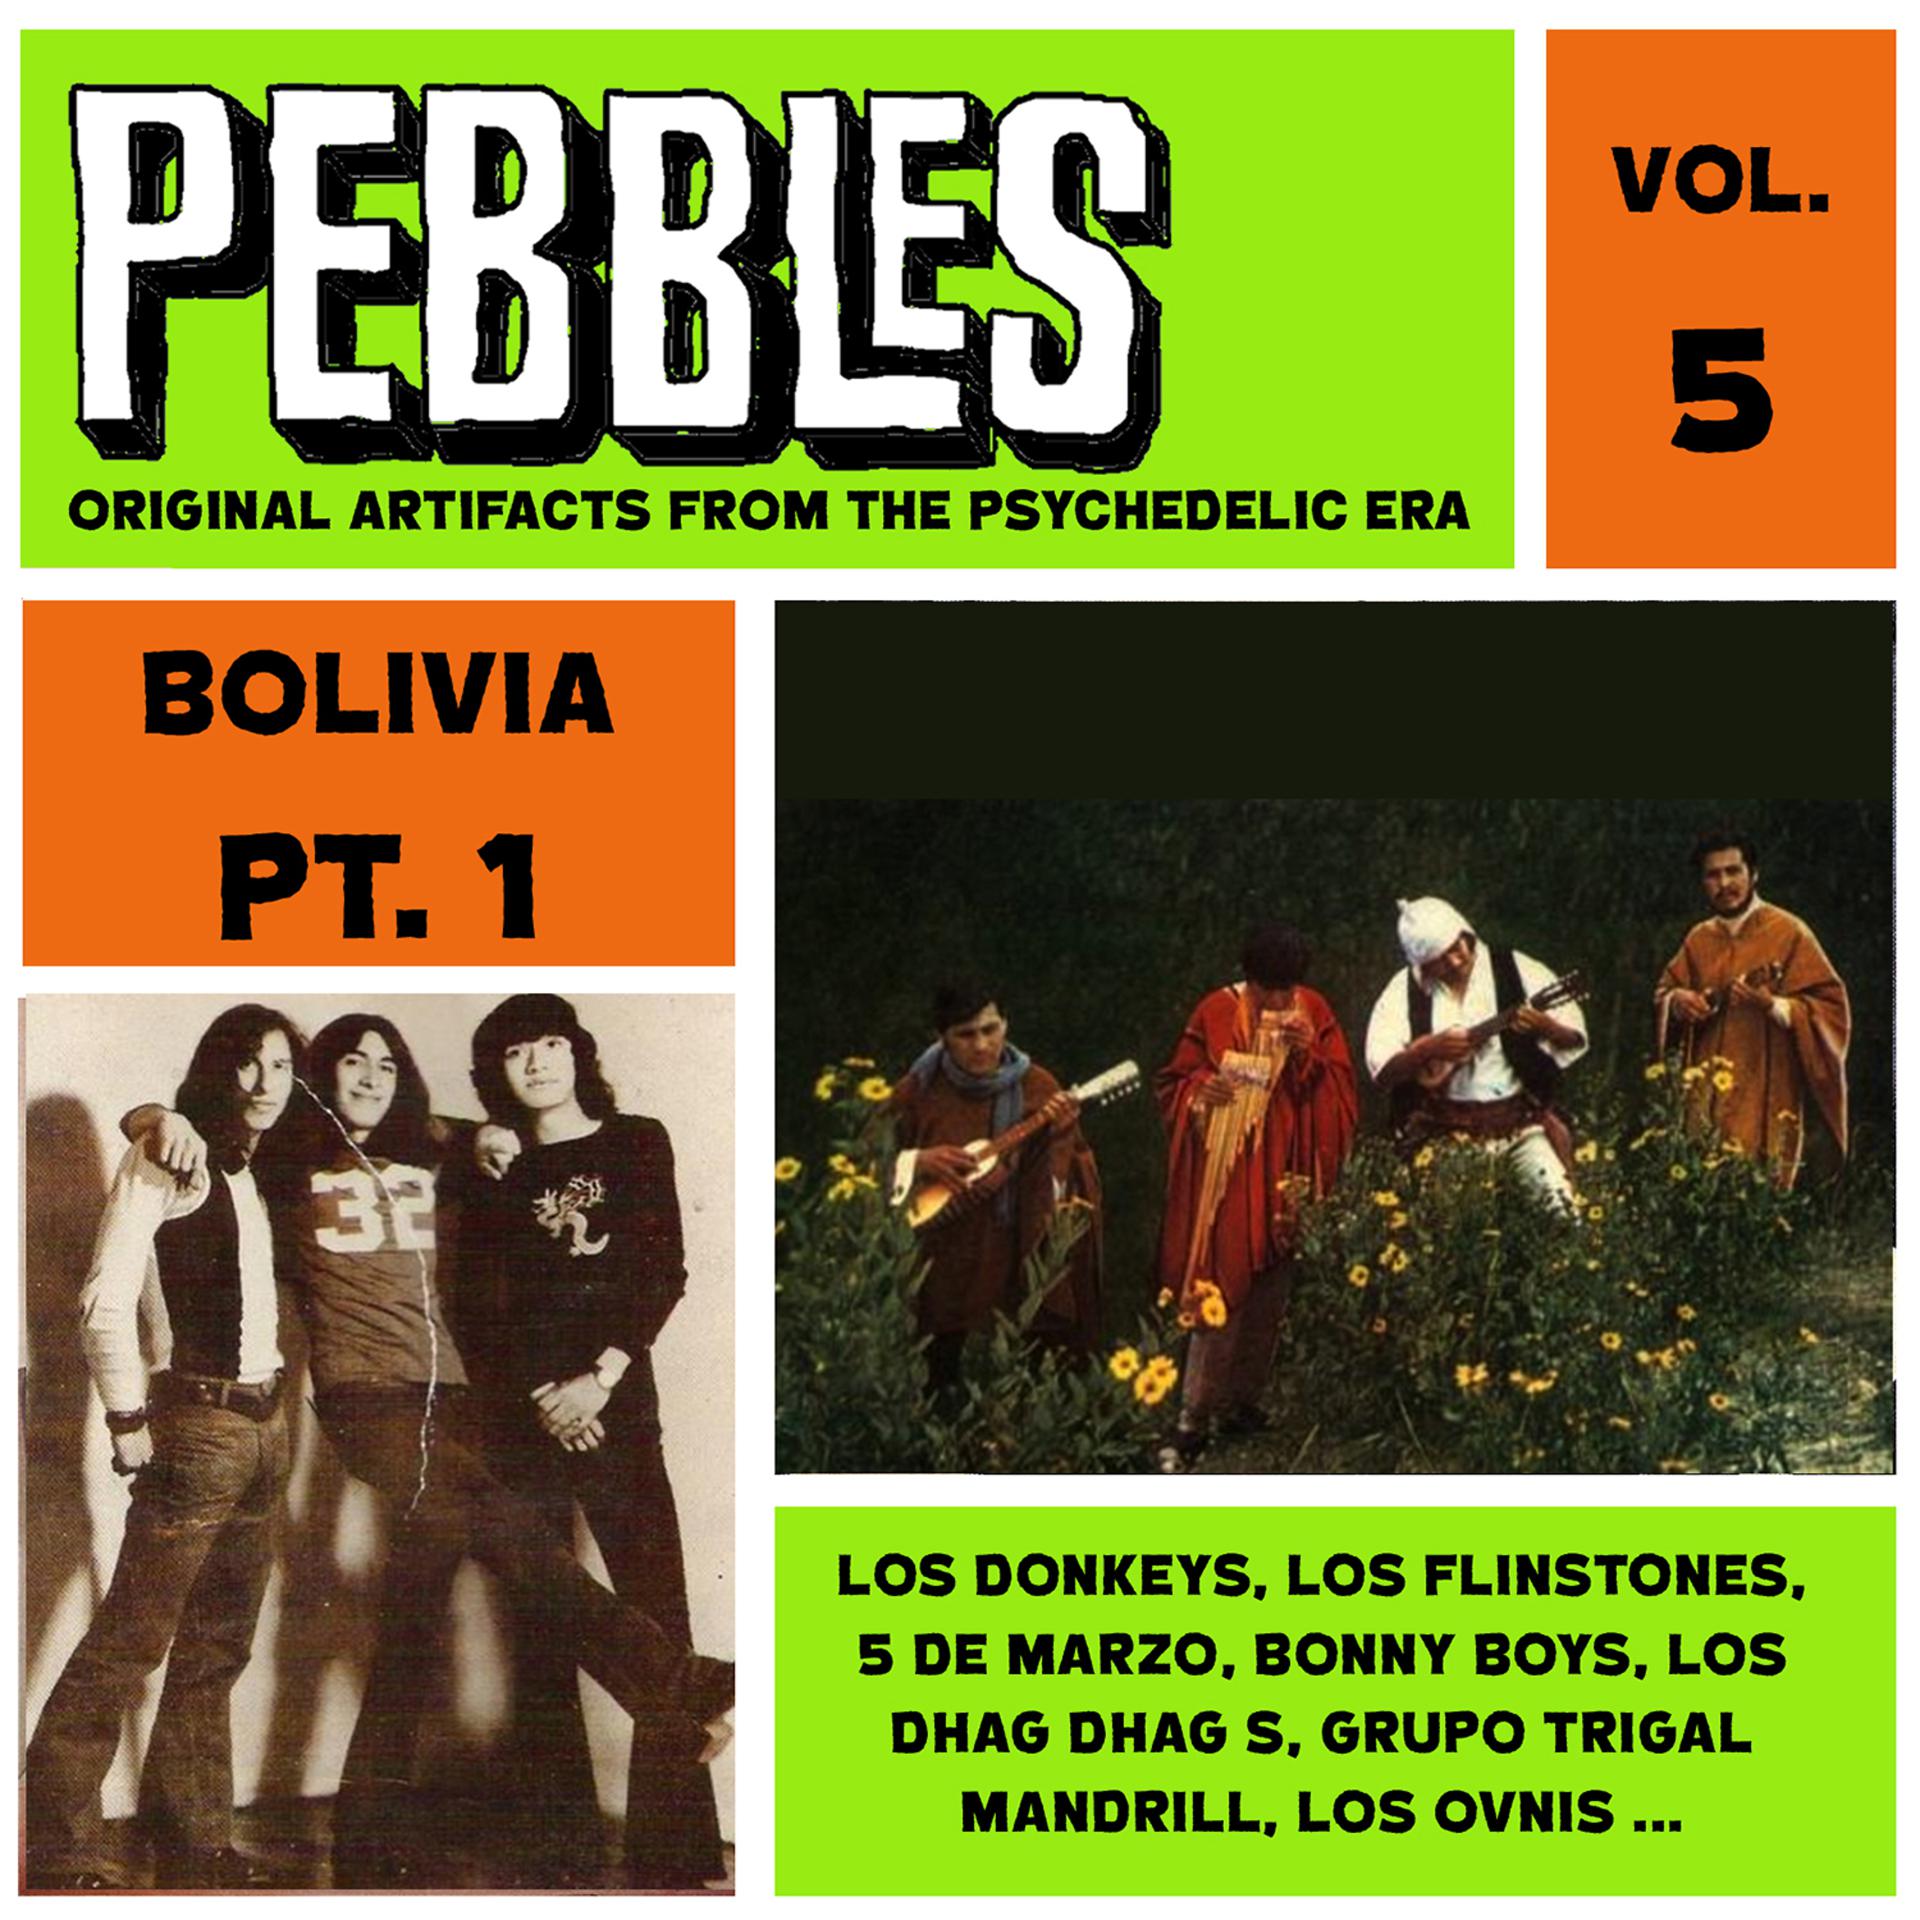 Постер альбома Pebbles Vol. 5, Bolivia Pt. 1, Originals Artifacts From The Psychedelic Era